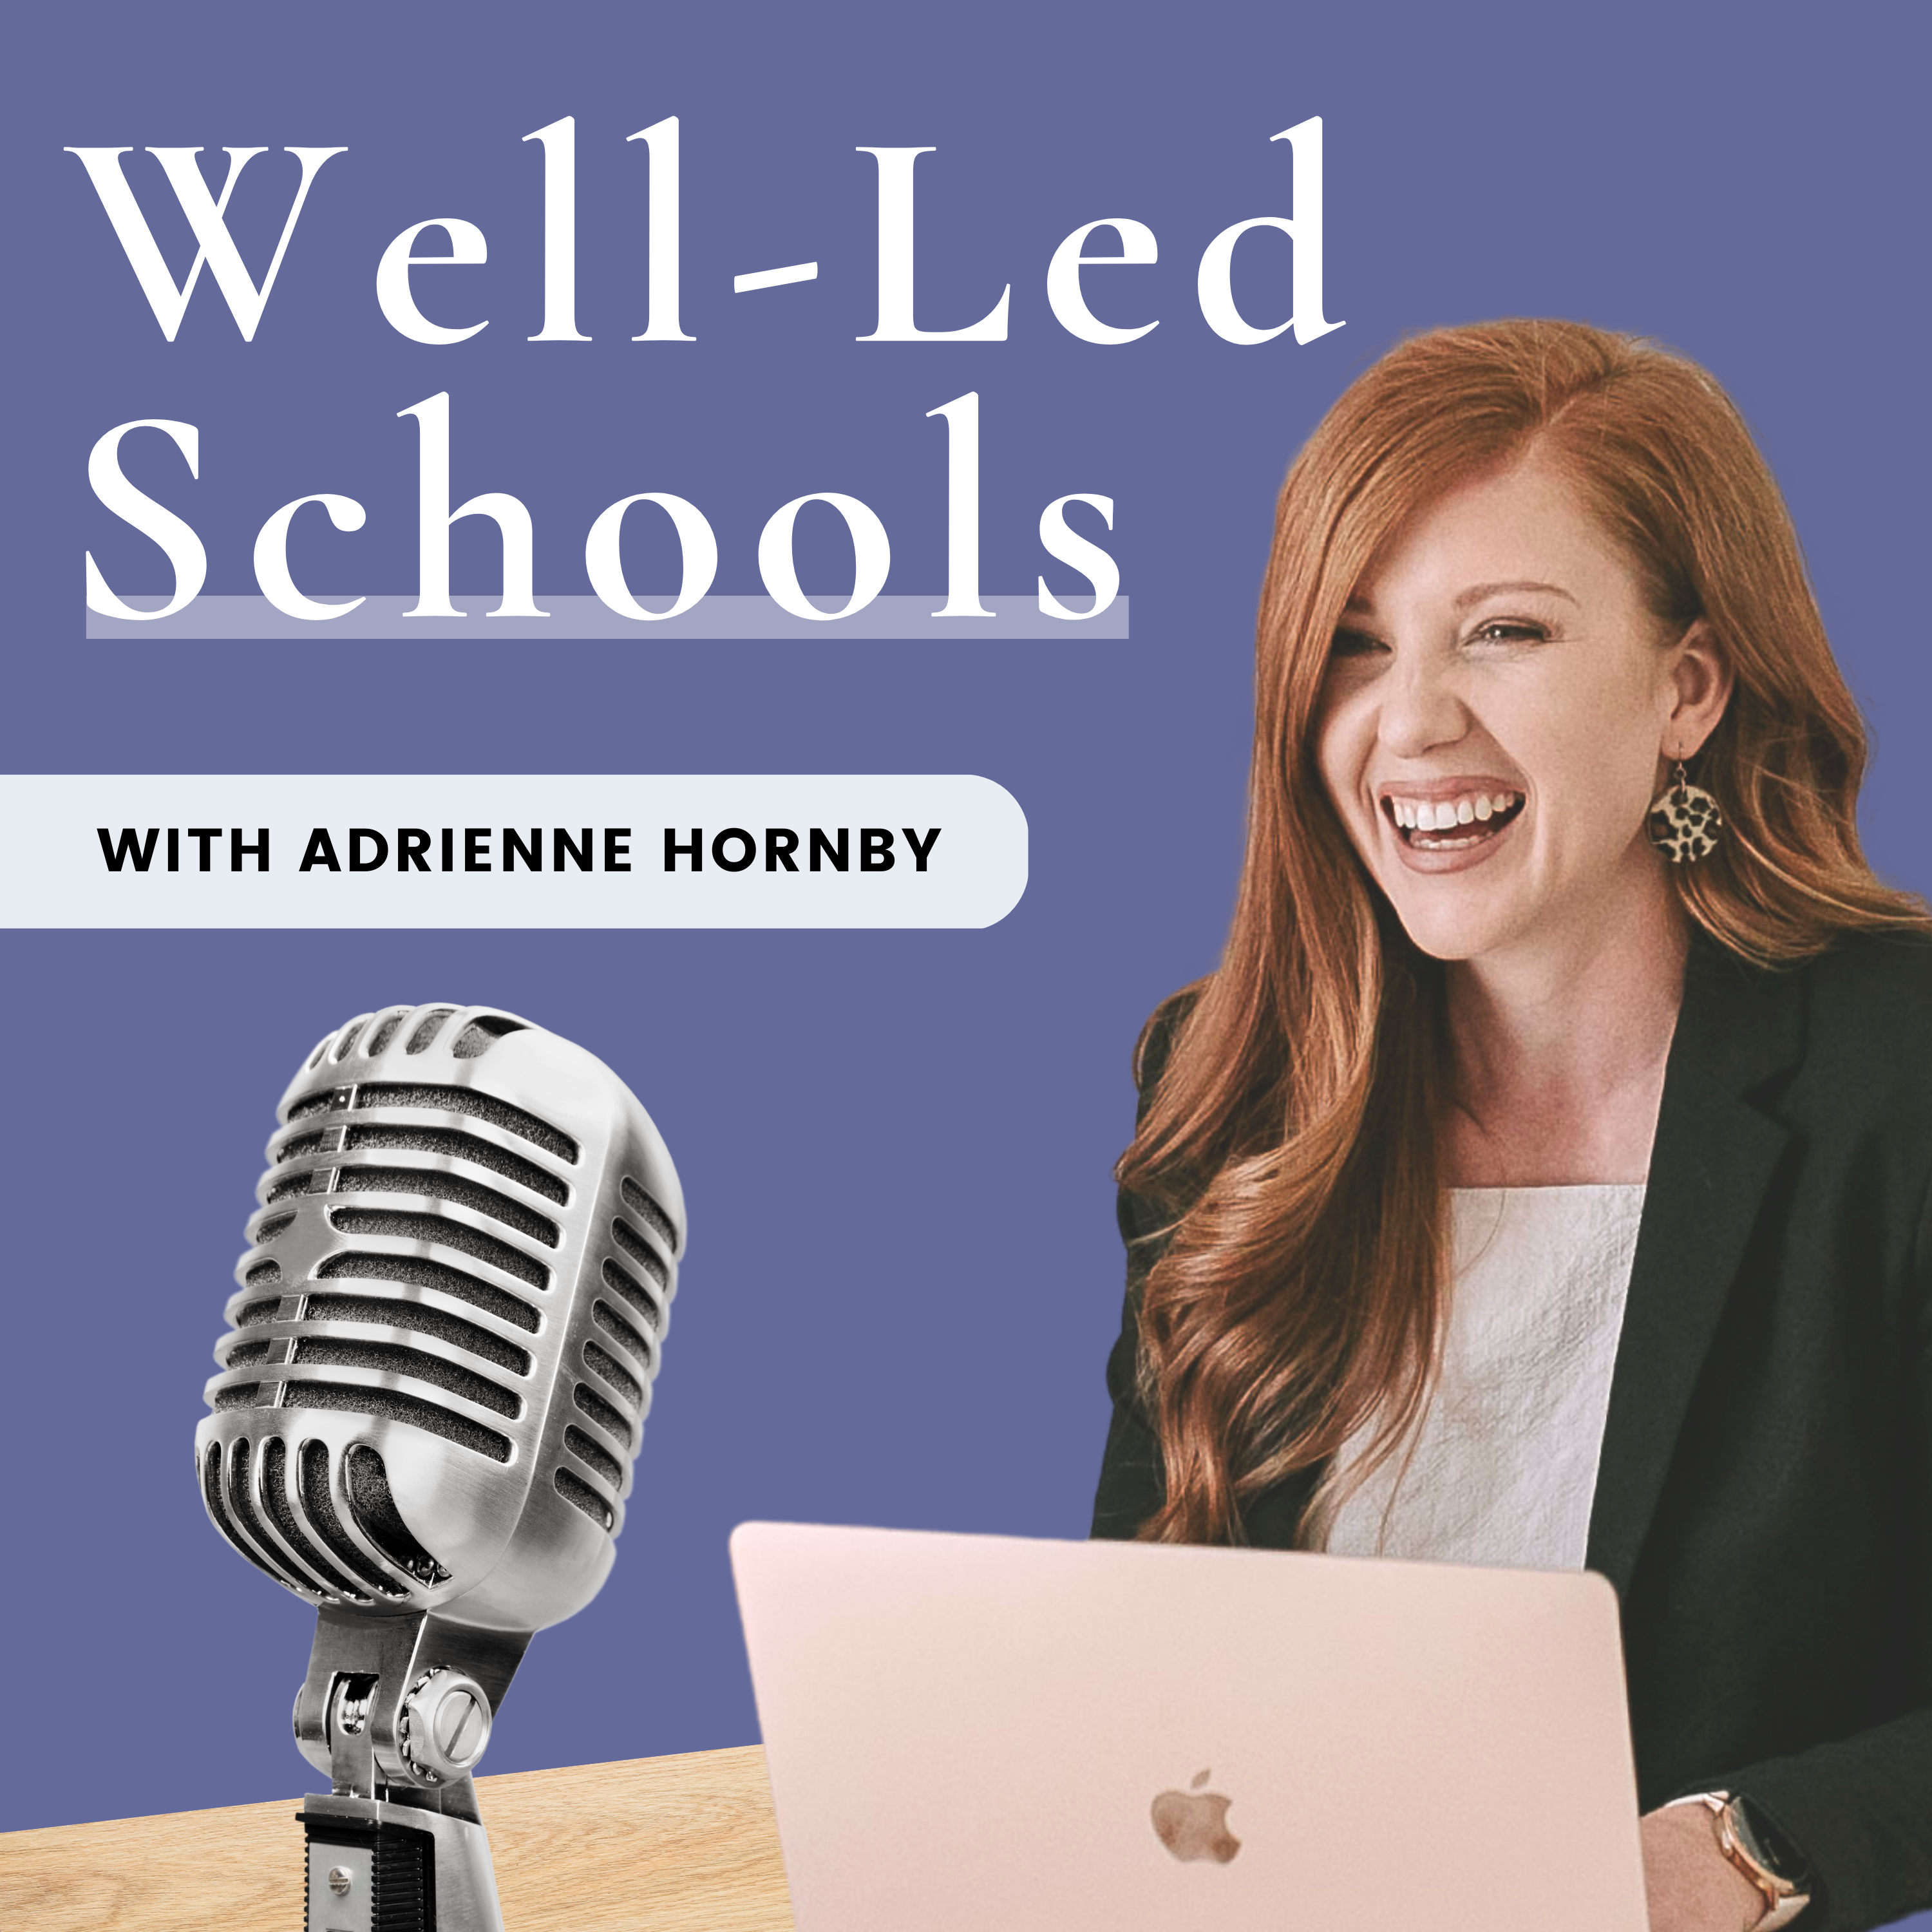 S2E6: The Guiding Principles For Leading Your School With Wellbeing in Mind with Corey Tavella